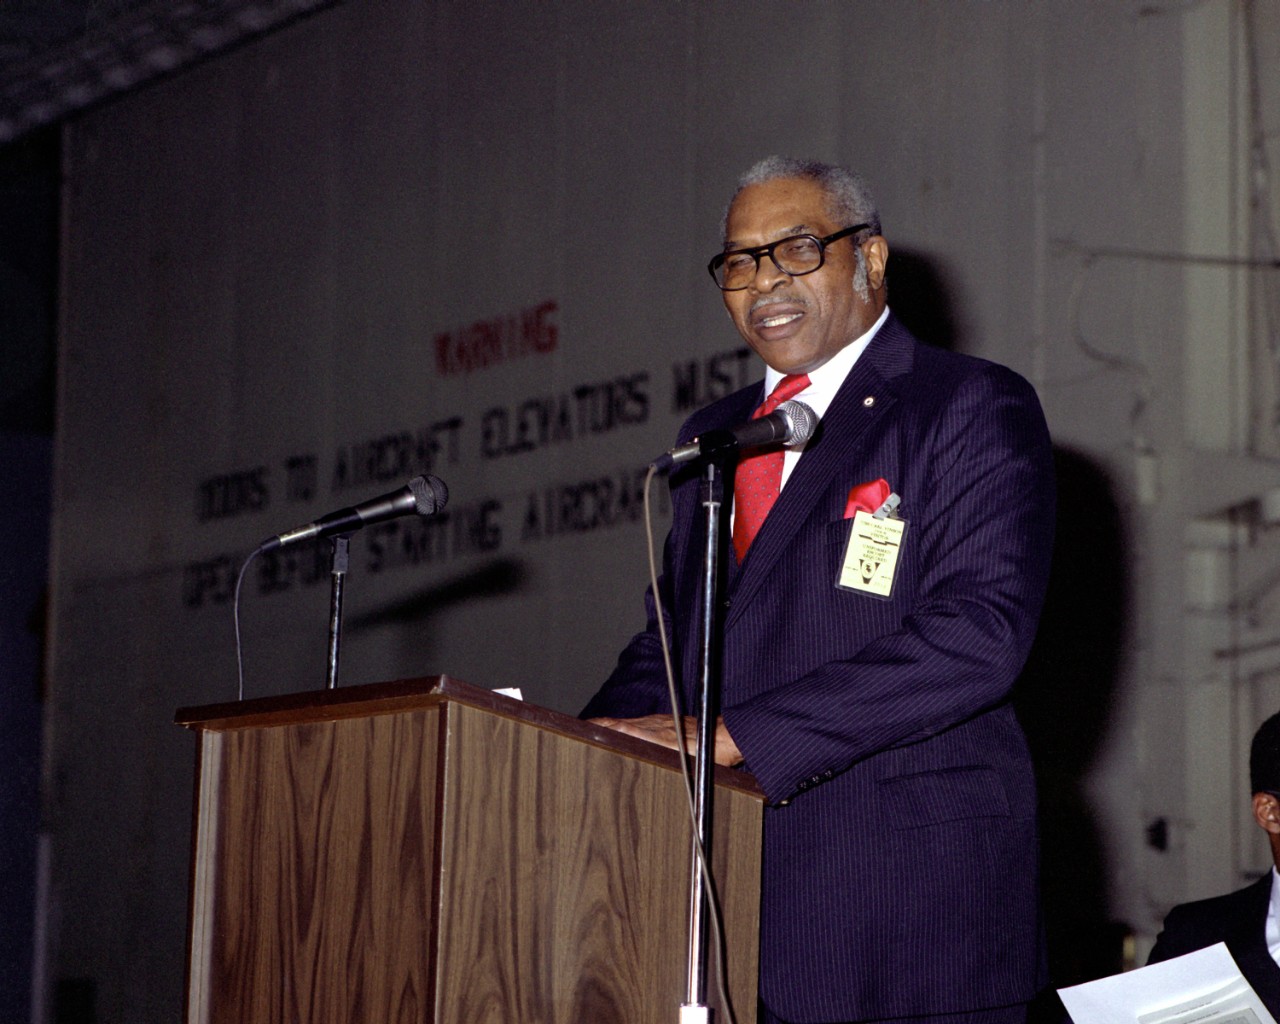 330-CFD-DN-SC-86-10323:  Black History Week, February 1986.   Jesse Arbor of the Golden Thirteen addresses crew members and guests during a Black History Week celebration onboard USS Carl Vinson (CVN-70).   Photographed by PH2 C.F. Laws, February 20, 1986.   Official U.S. Navy Photograph, now in the collections of the National Archives.